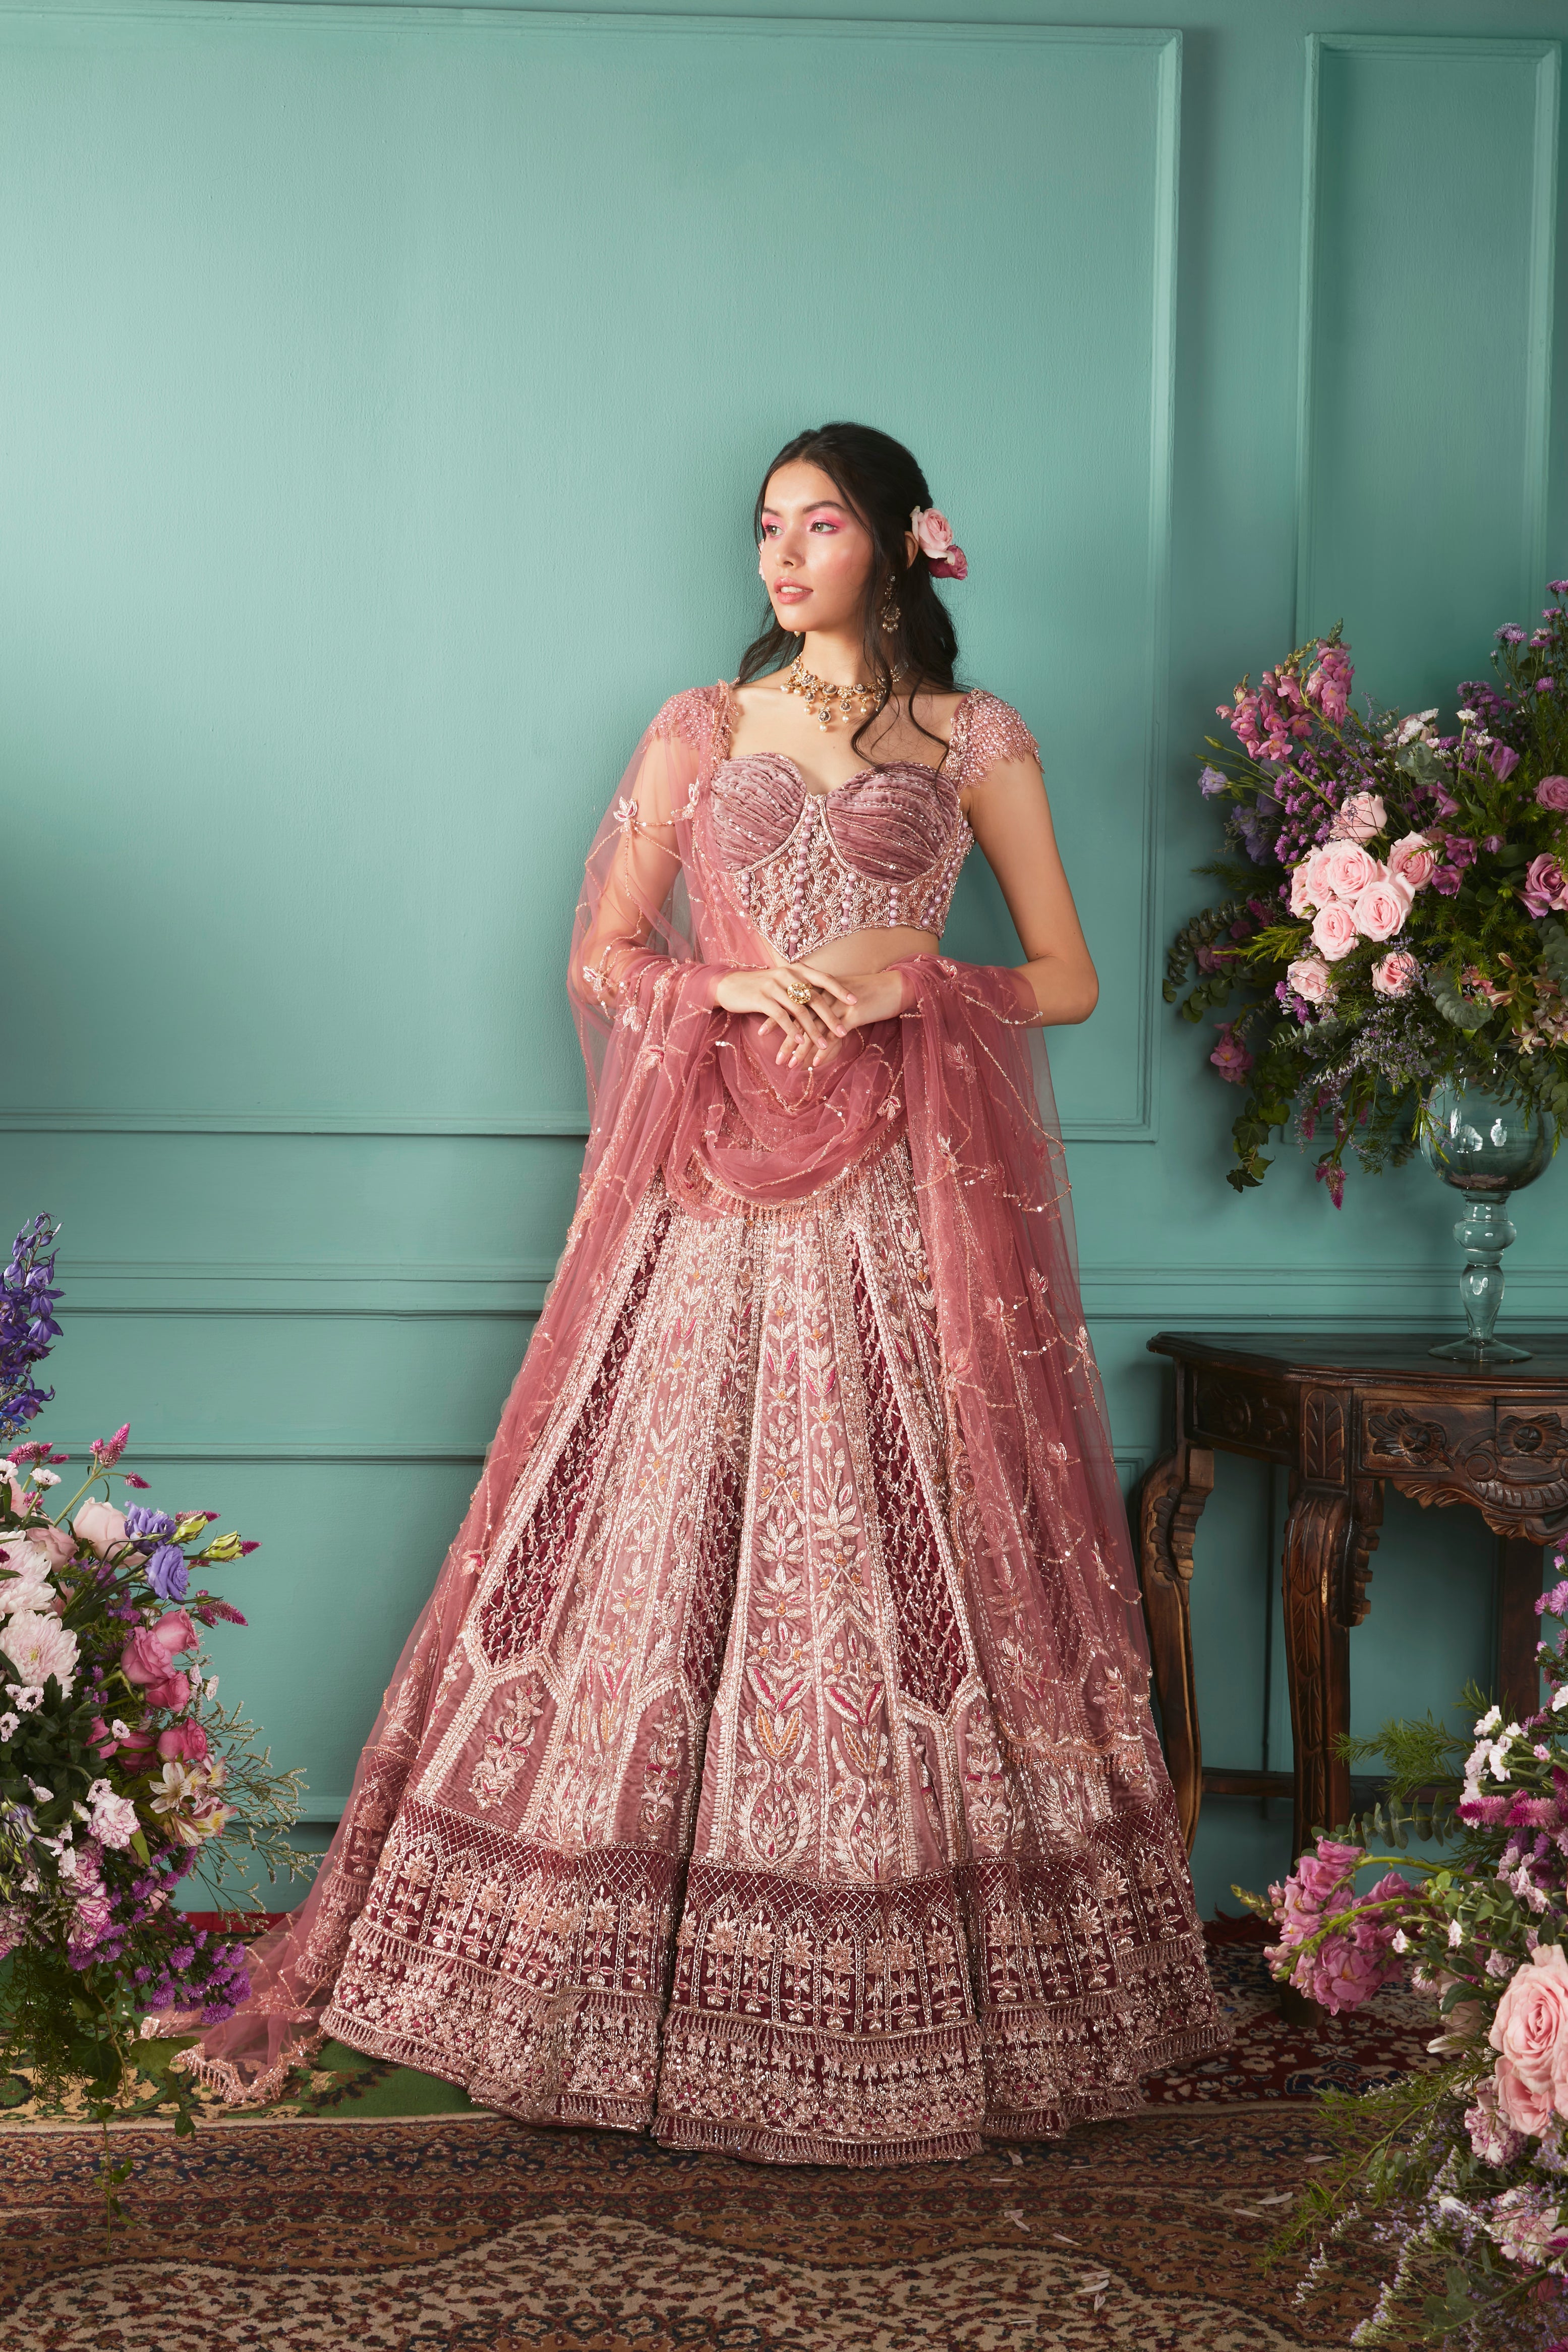 Rust/Rose Lehenga With French Chateau Elements